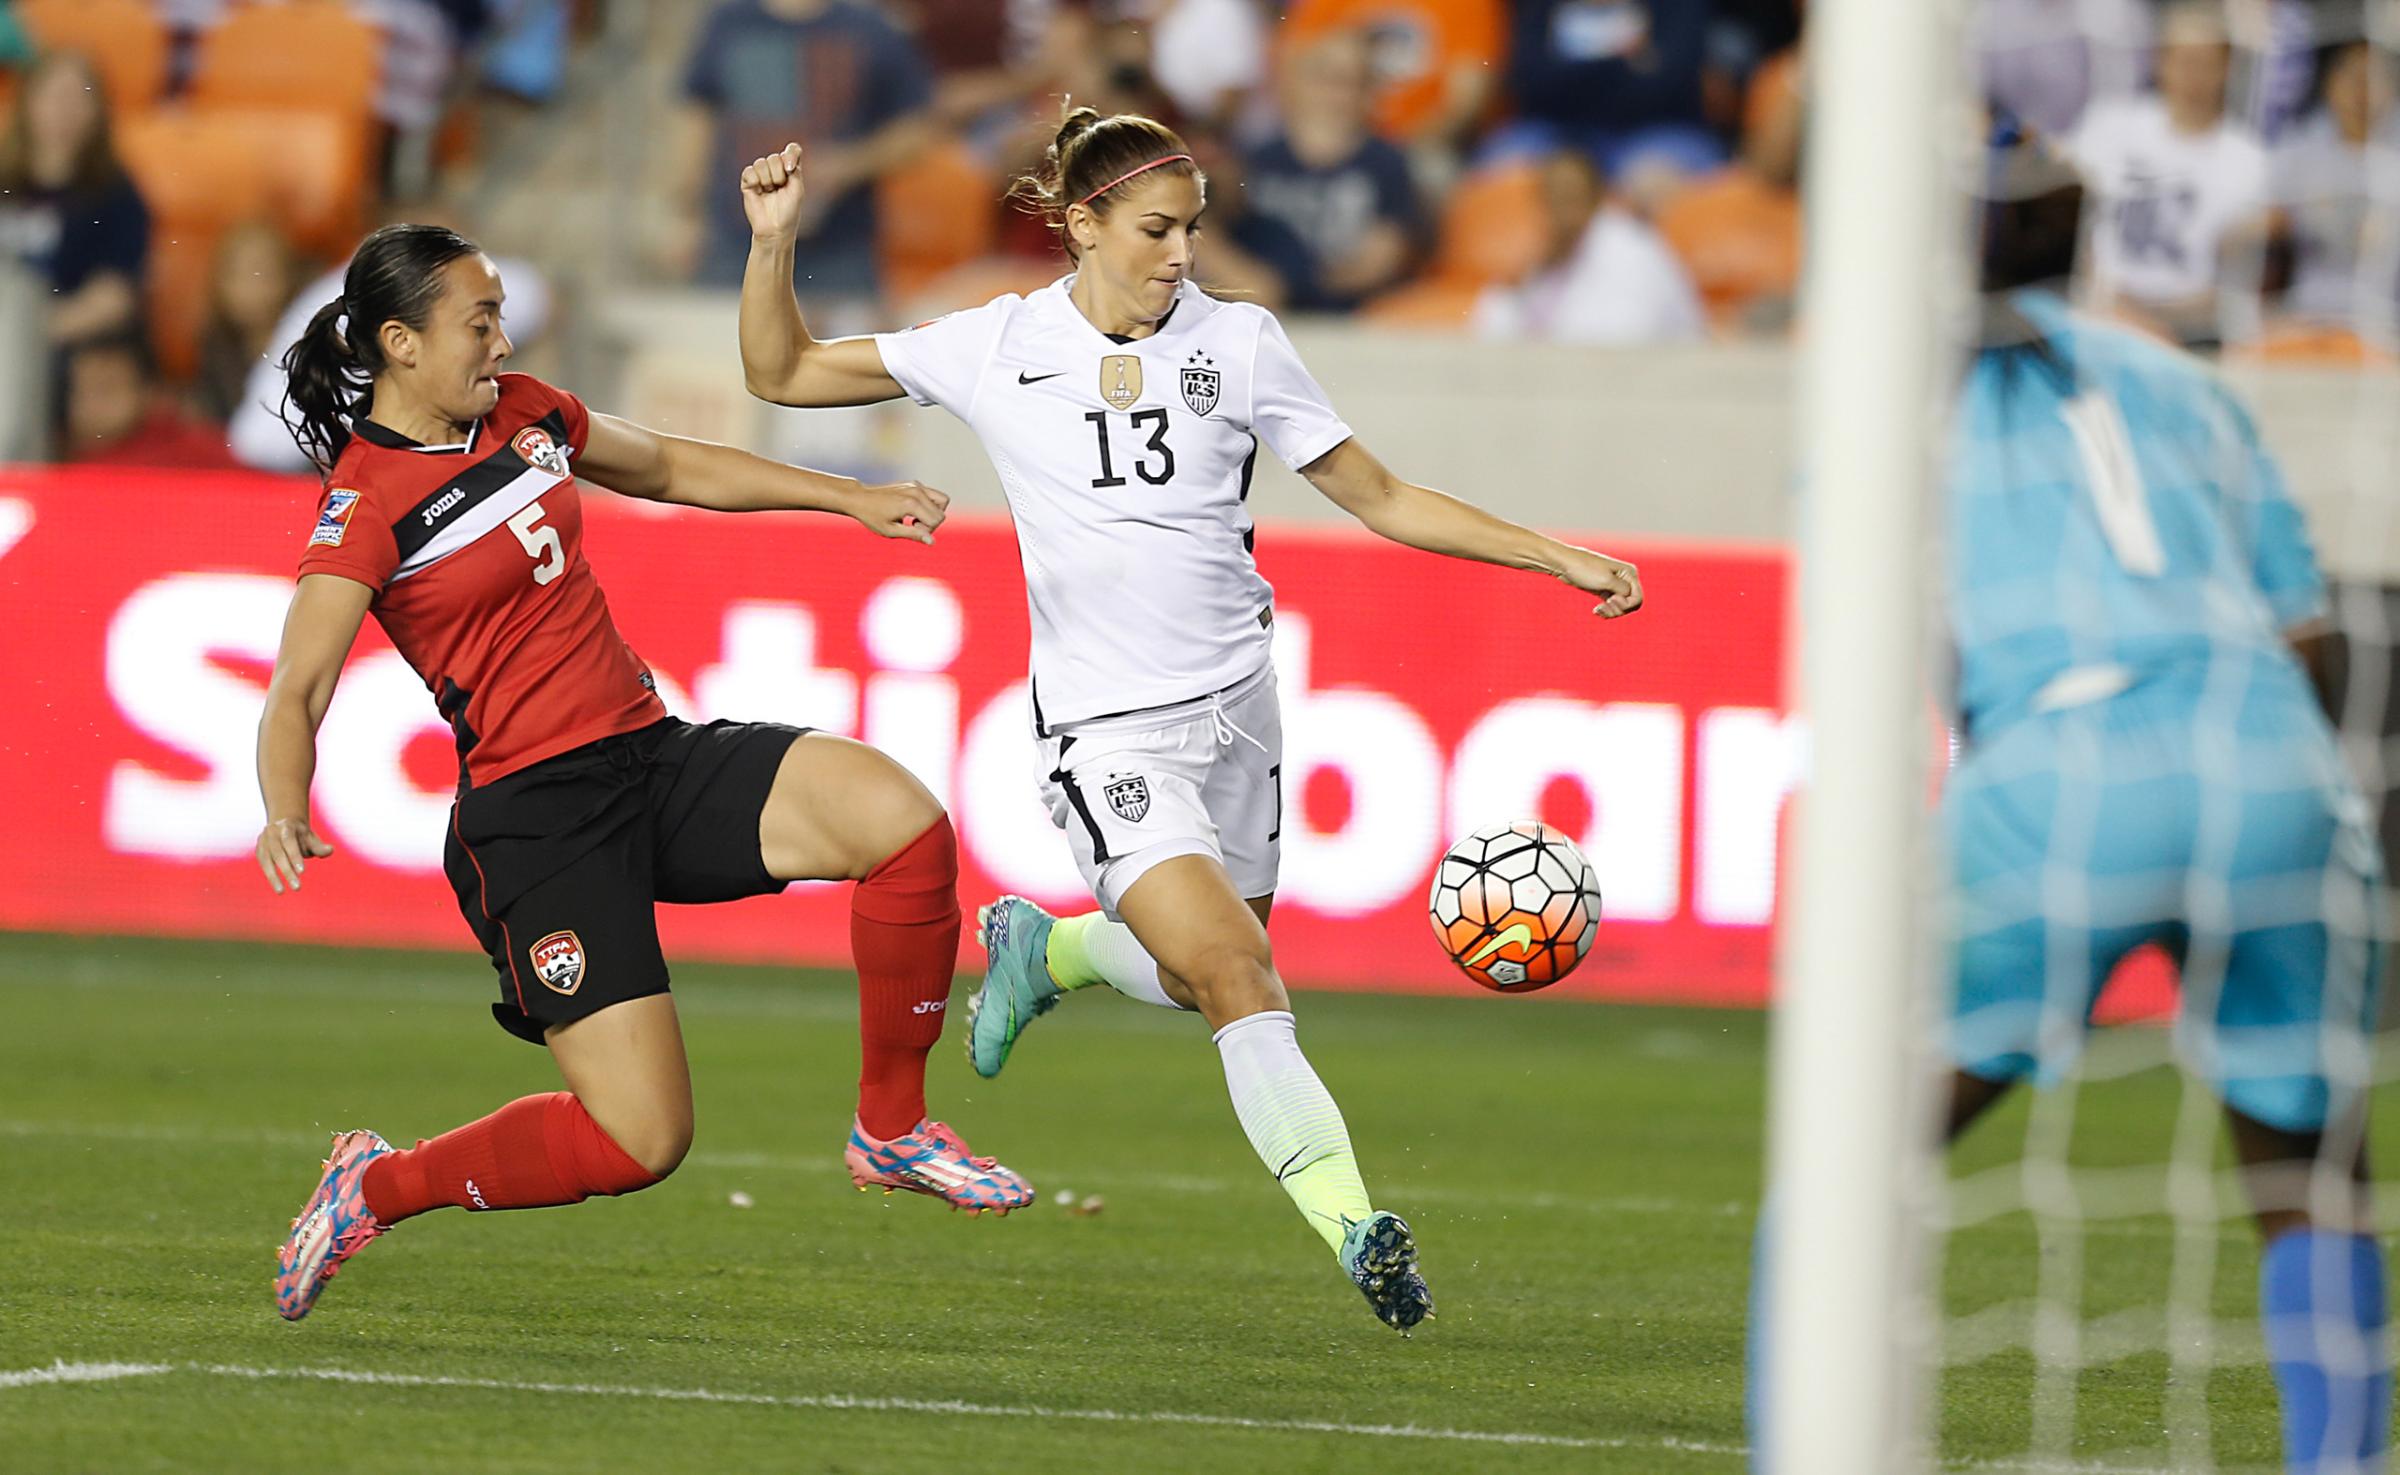 Alex Morgan—A semifinal-winning header at the London Games turned her into a superstar. One year after winning the World Cup, she leads a U.S. squad favored to win gold over France and Brazil.